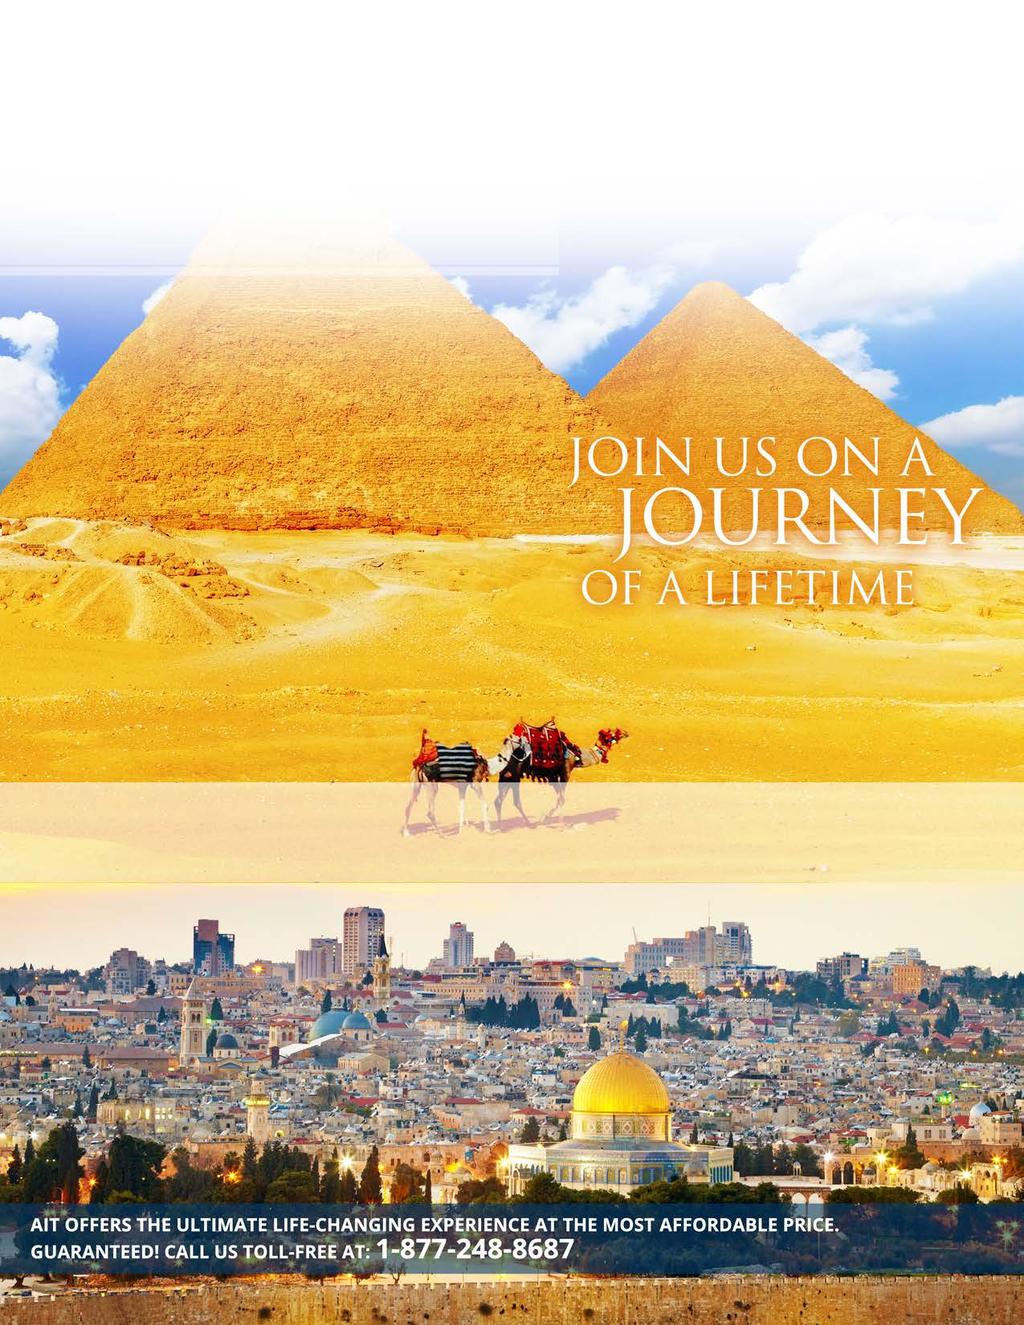 INTO THE PROMISED LAND TOUR 15 DAYS INSPIRATIONAL JOURNEY TO EGYPT, JORDAN & ISRAEL COMPLETE LAND PACKAGE WITH 5 STAR HOTELS FROM $2,850 WHY JOIN US?